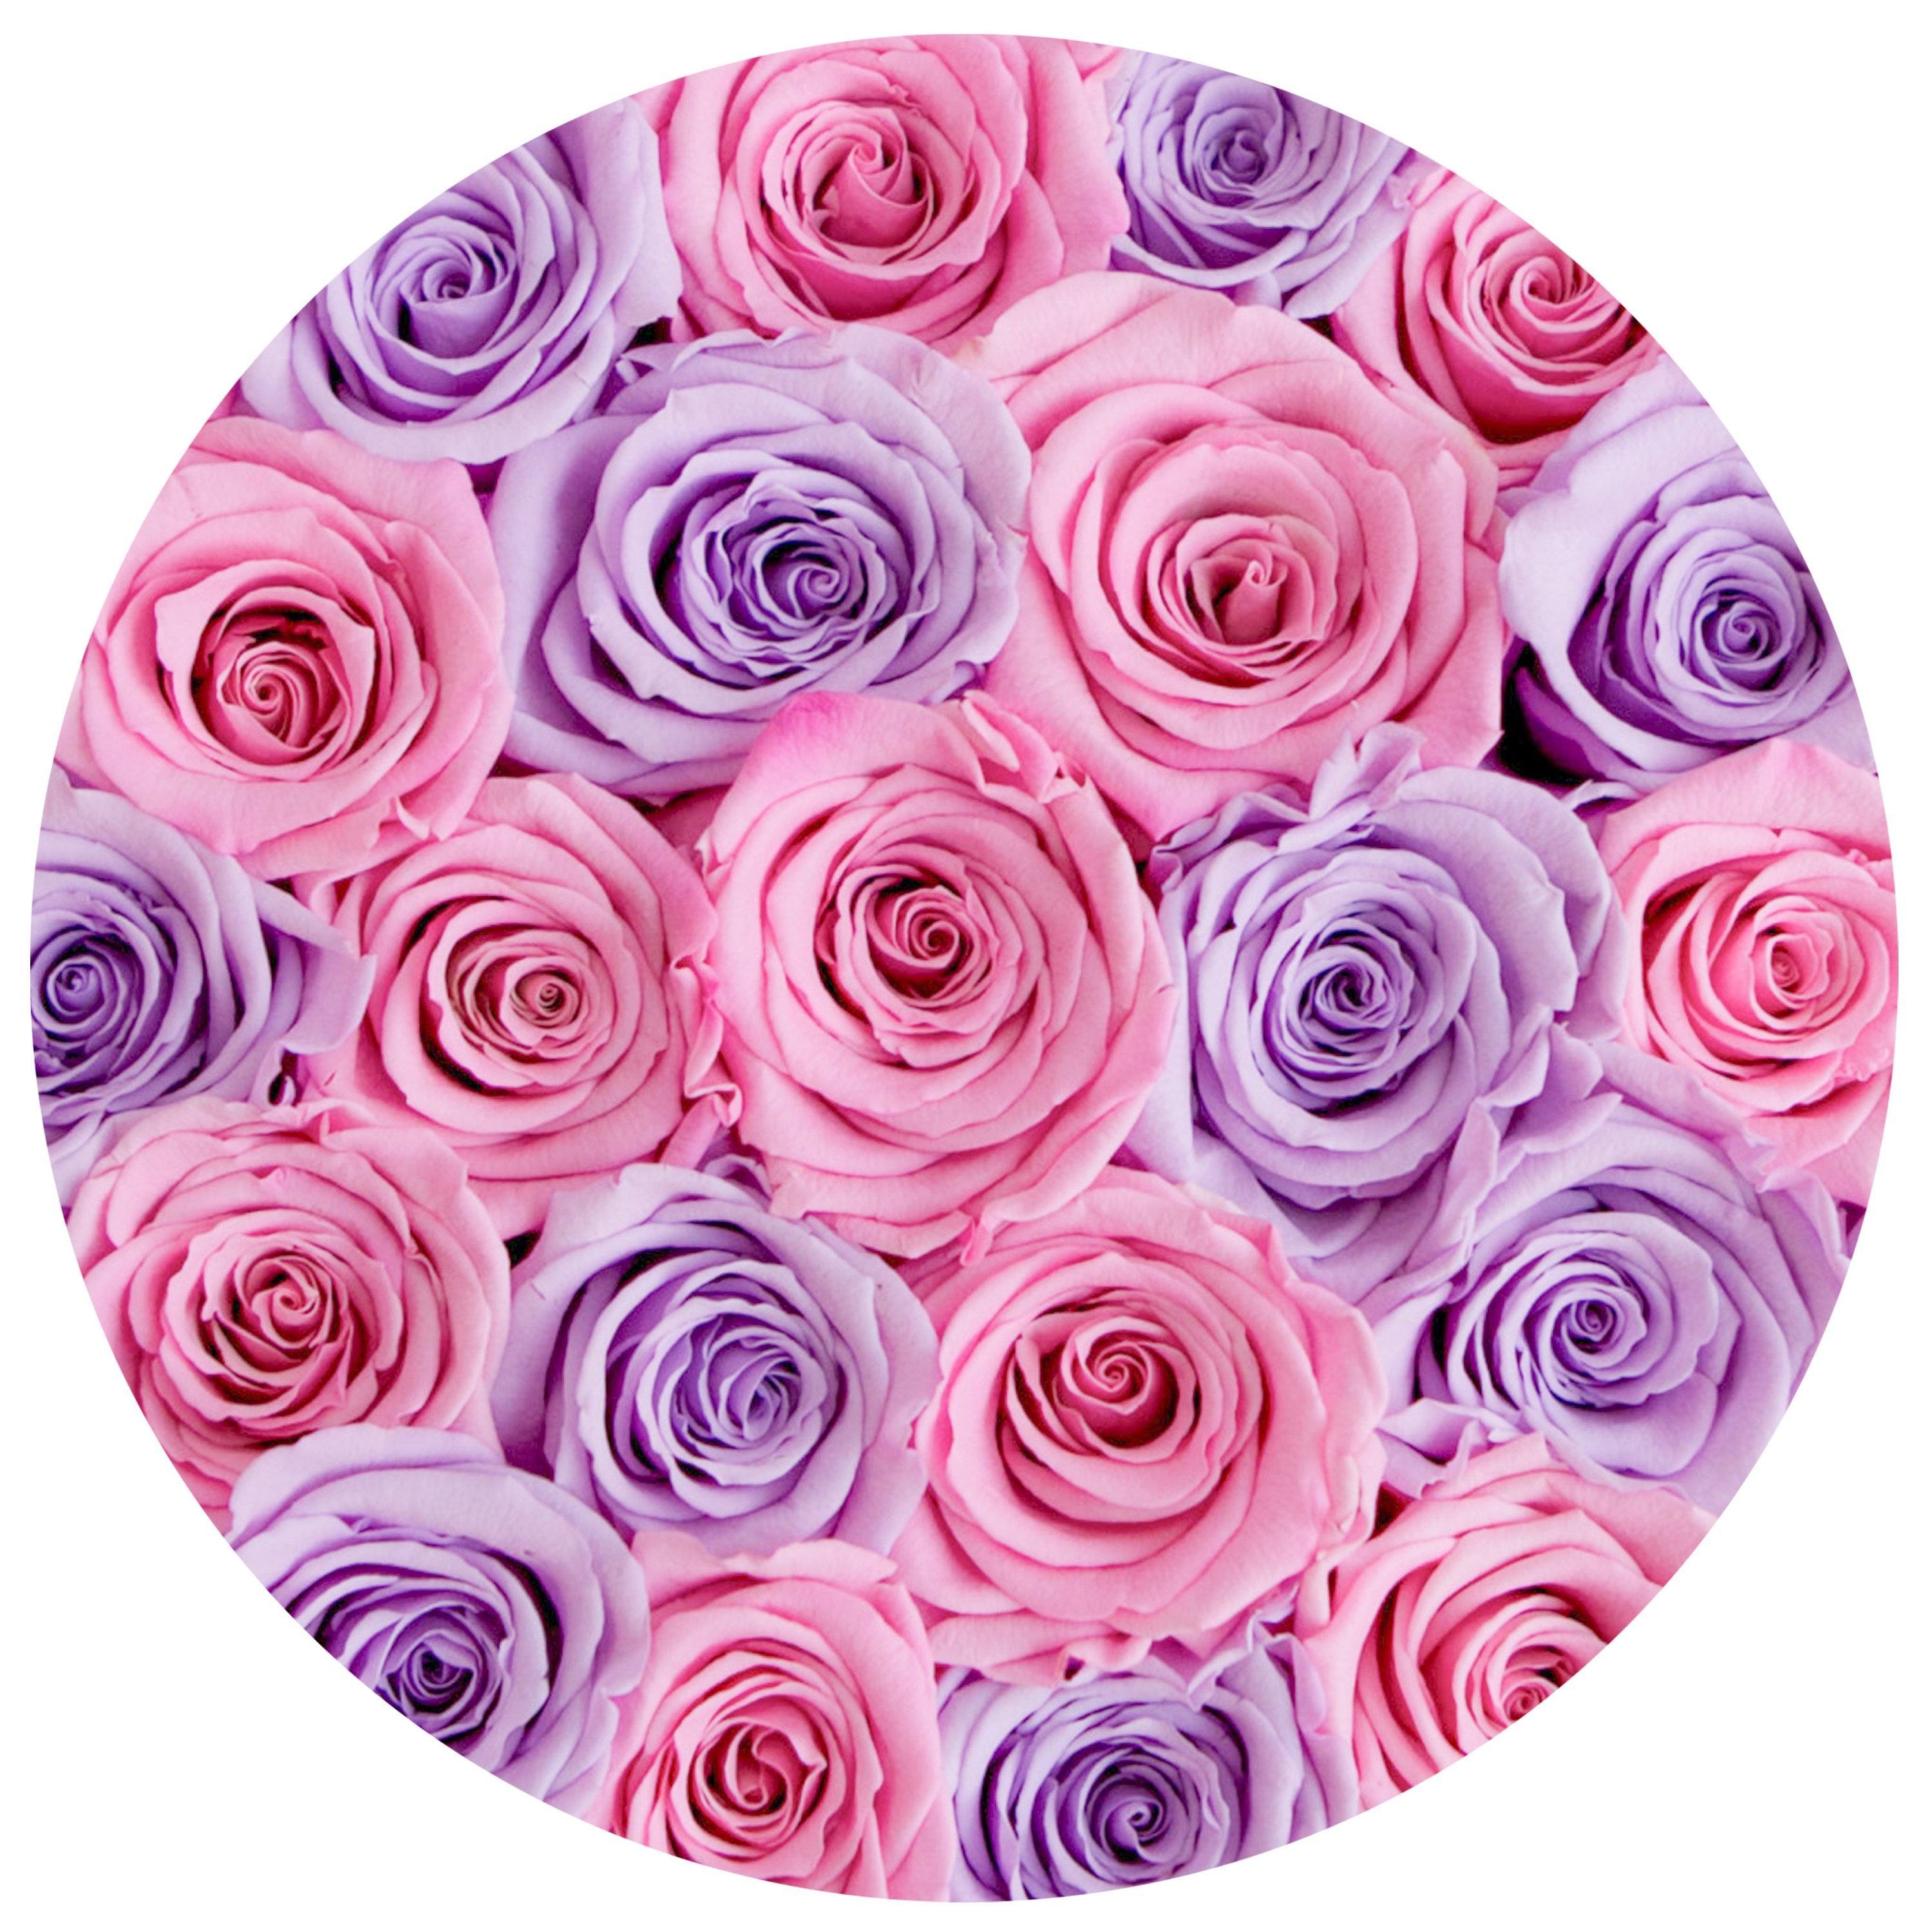 classic round box - white - lavender&pink-candy roses mixed eternity roses - the million roses